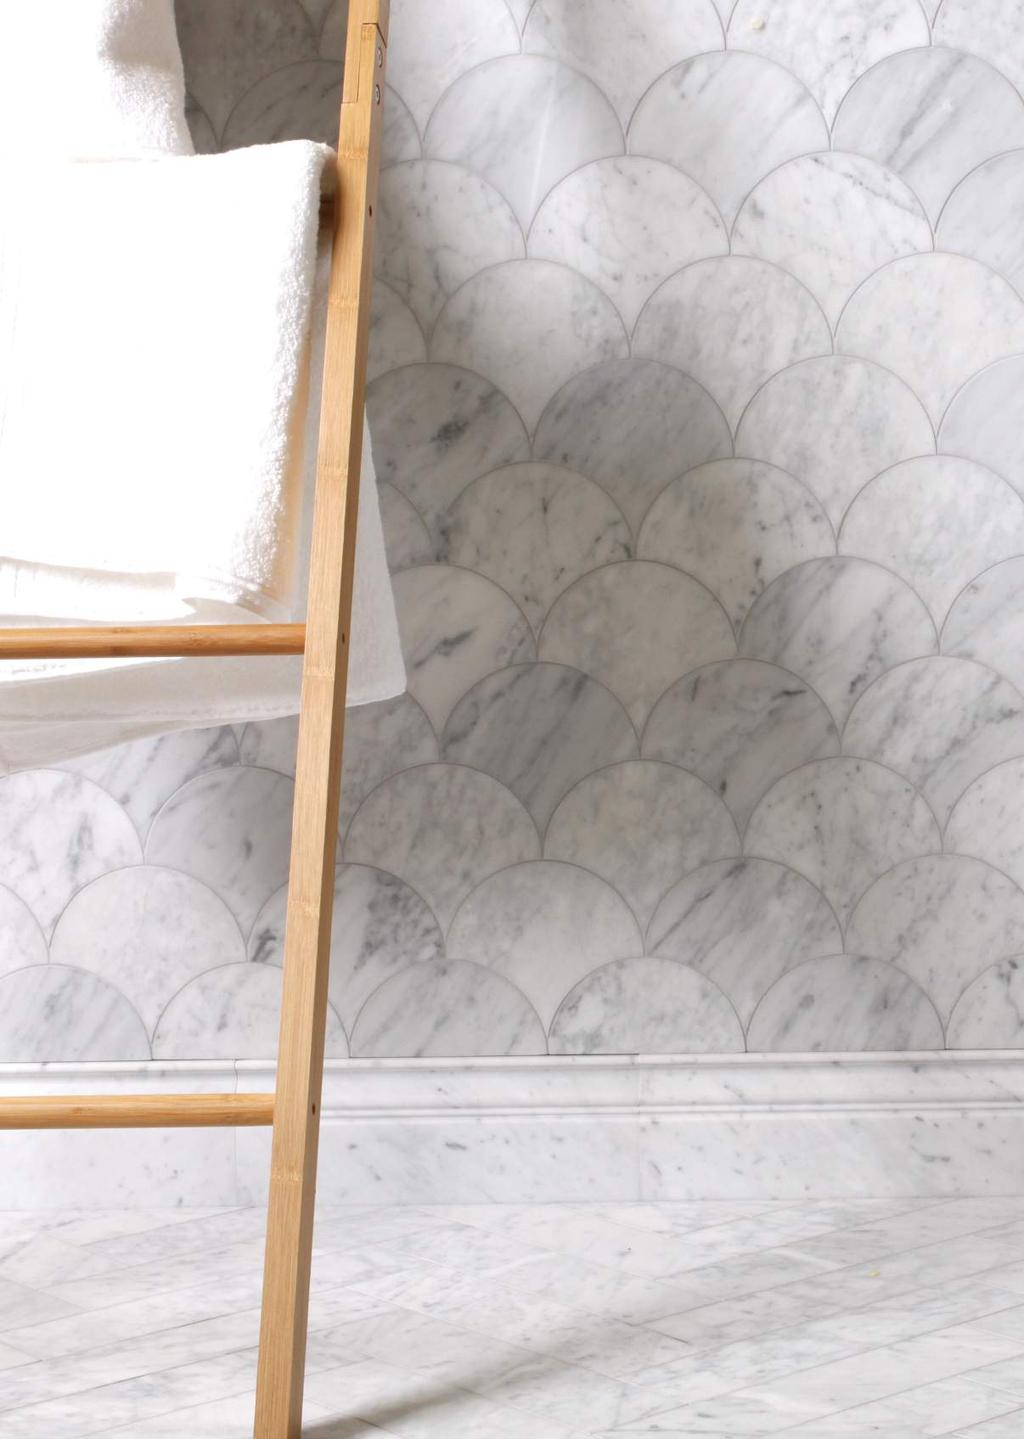 Product Details & Directions for use Product Milestone features natural Italian Carrara marble,